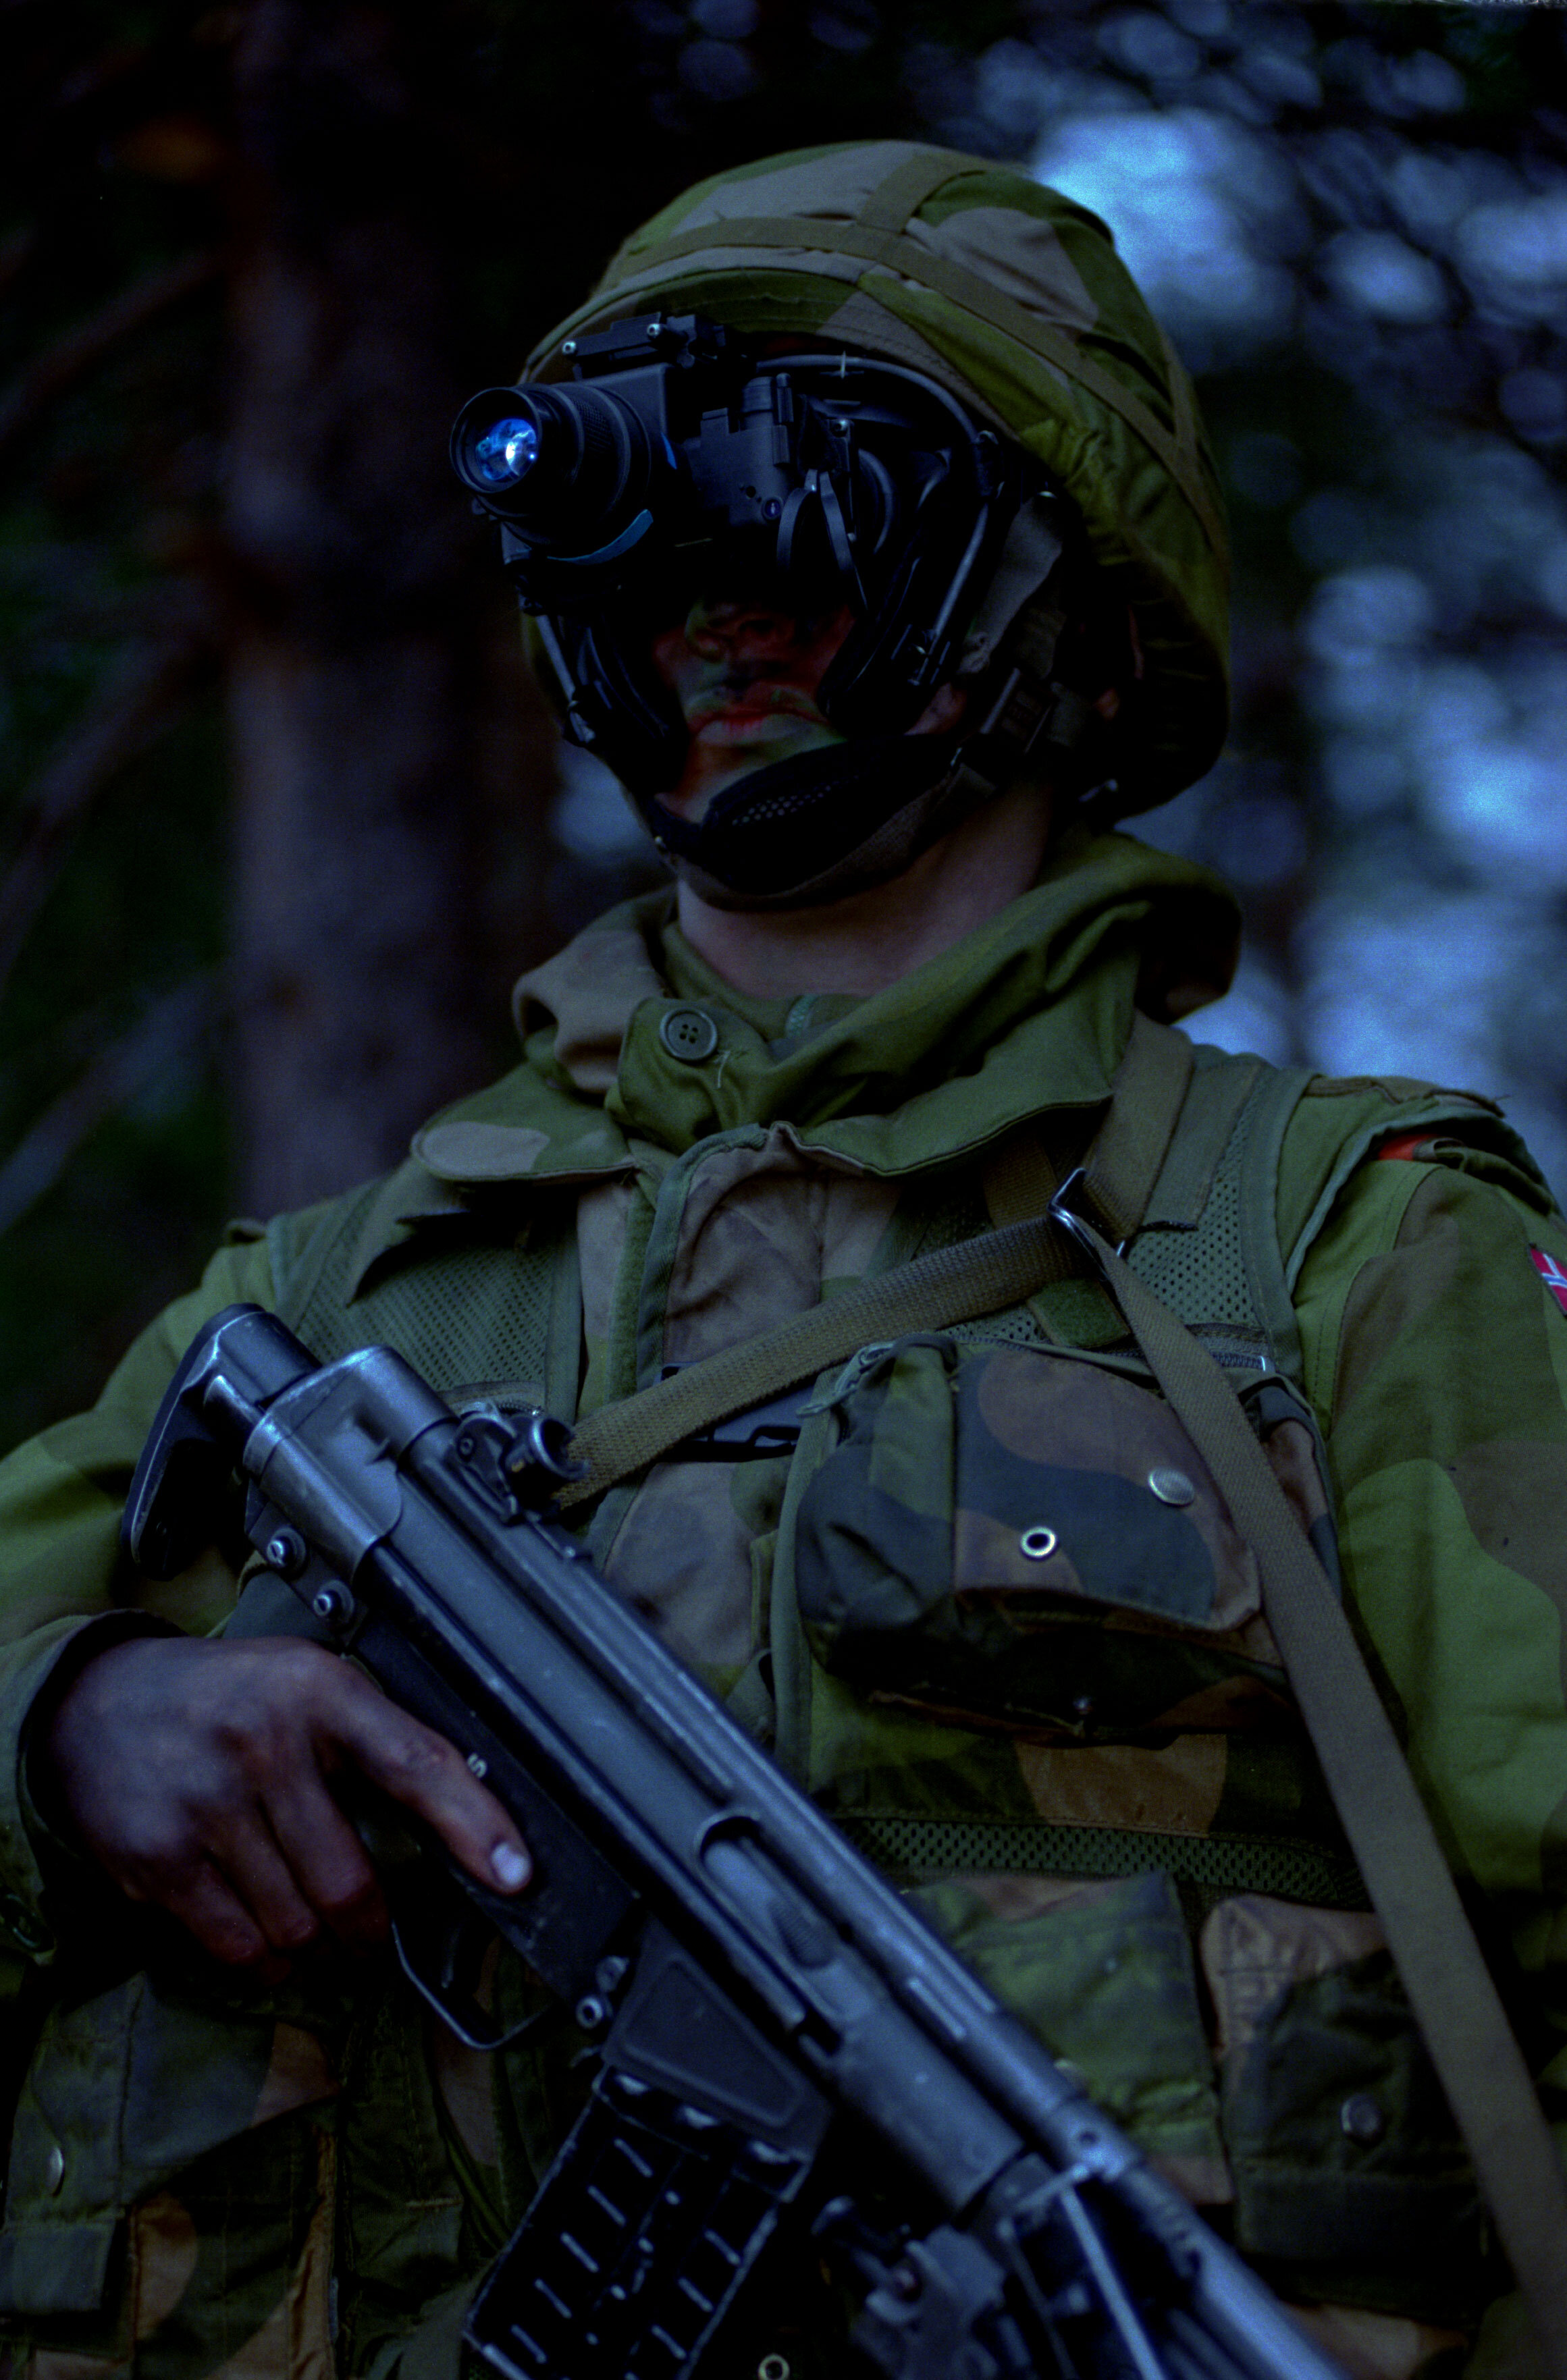  Soldier with AG3F1 and night vision equipment, 2000 